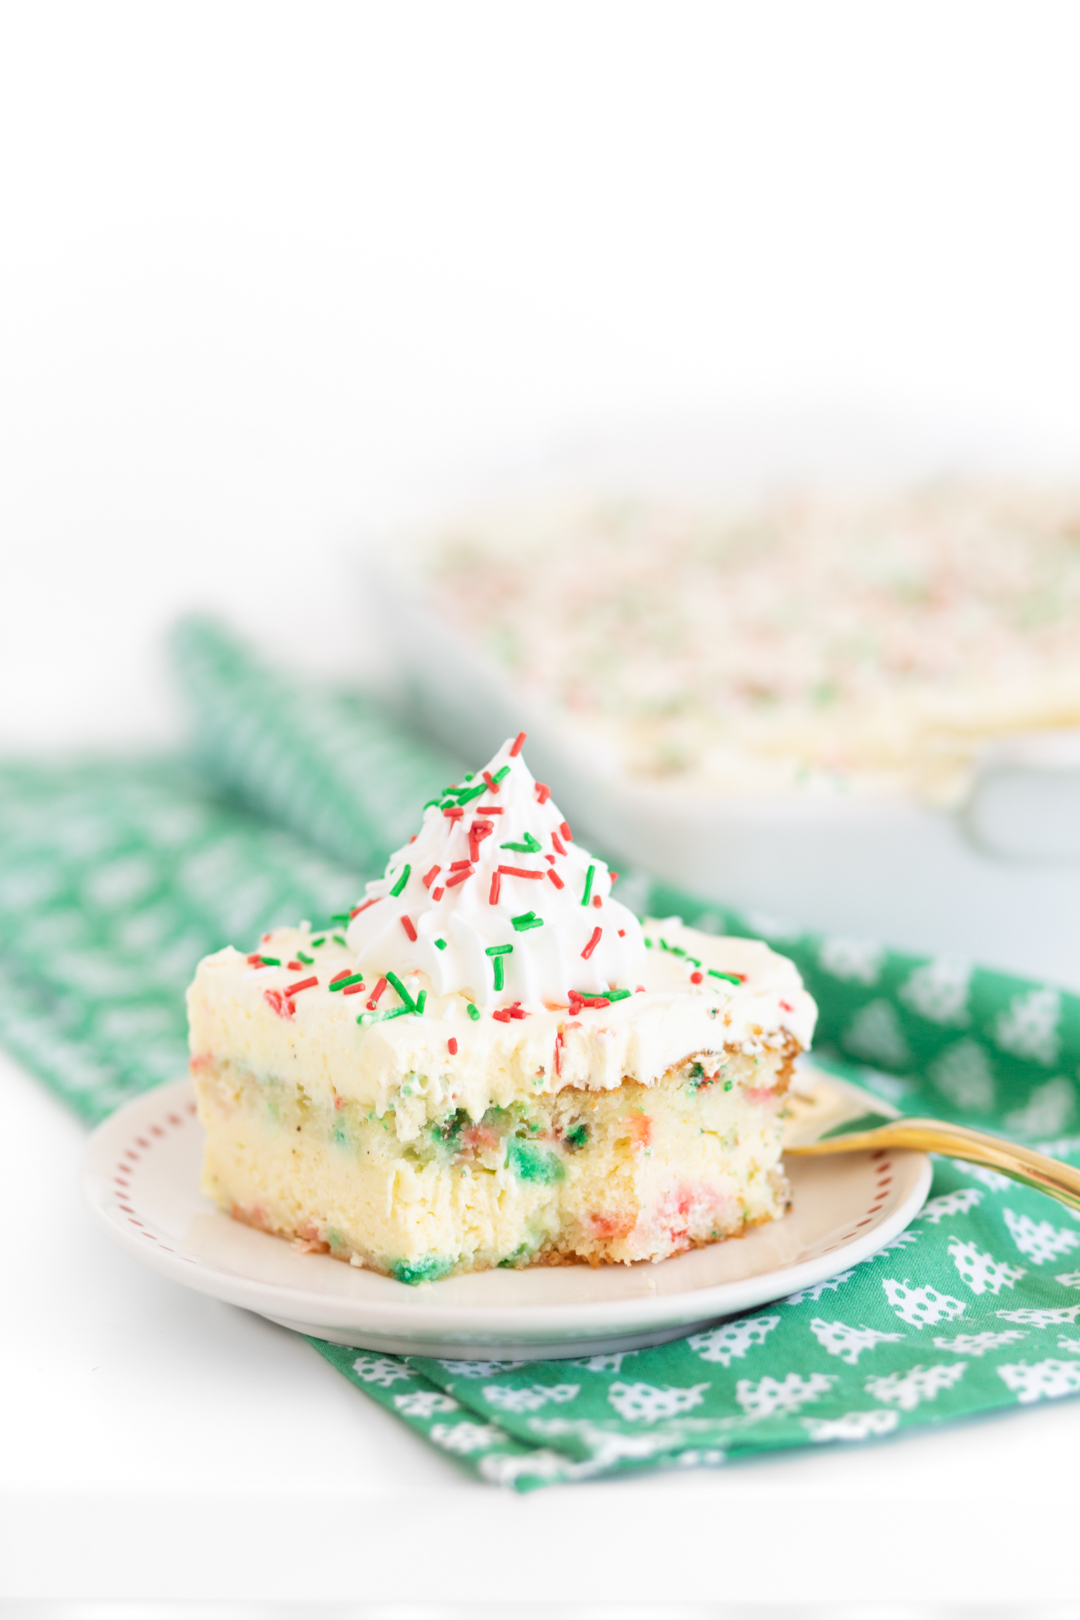 slice of pretty holiday layer cake on a small plate served in front of cake in casserole dish behind it.